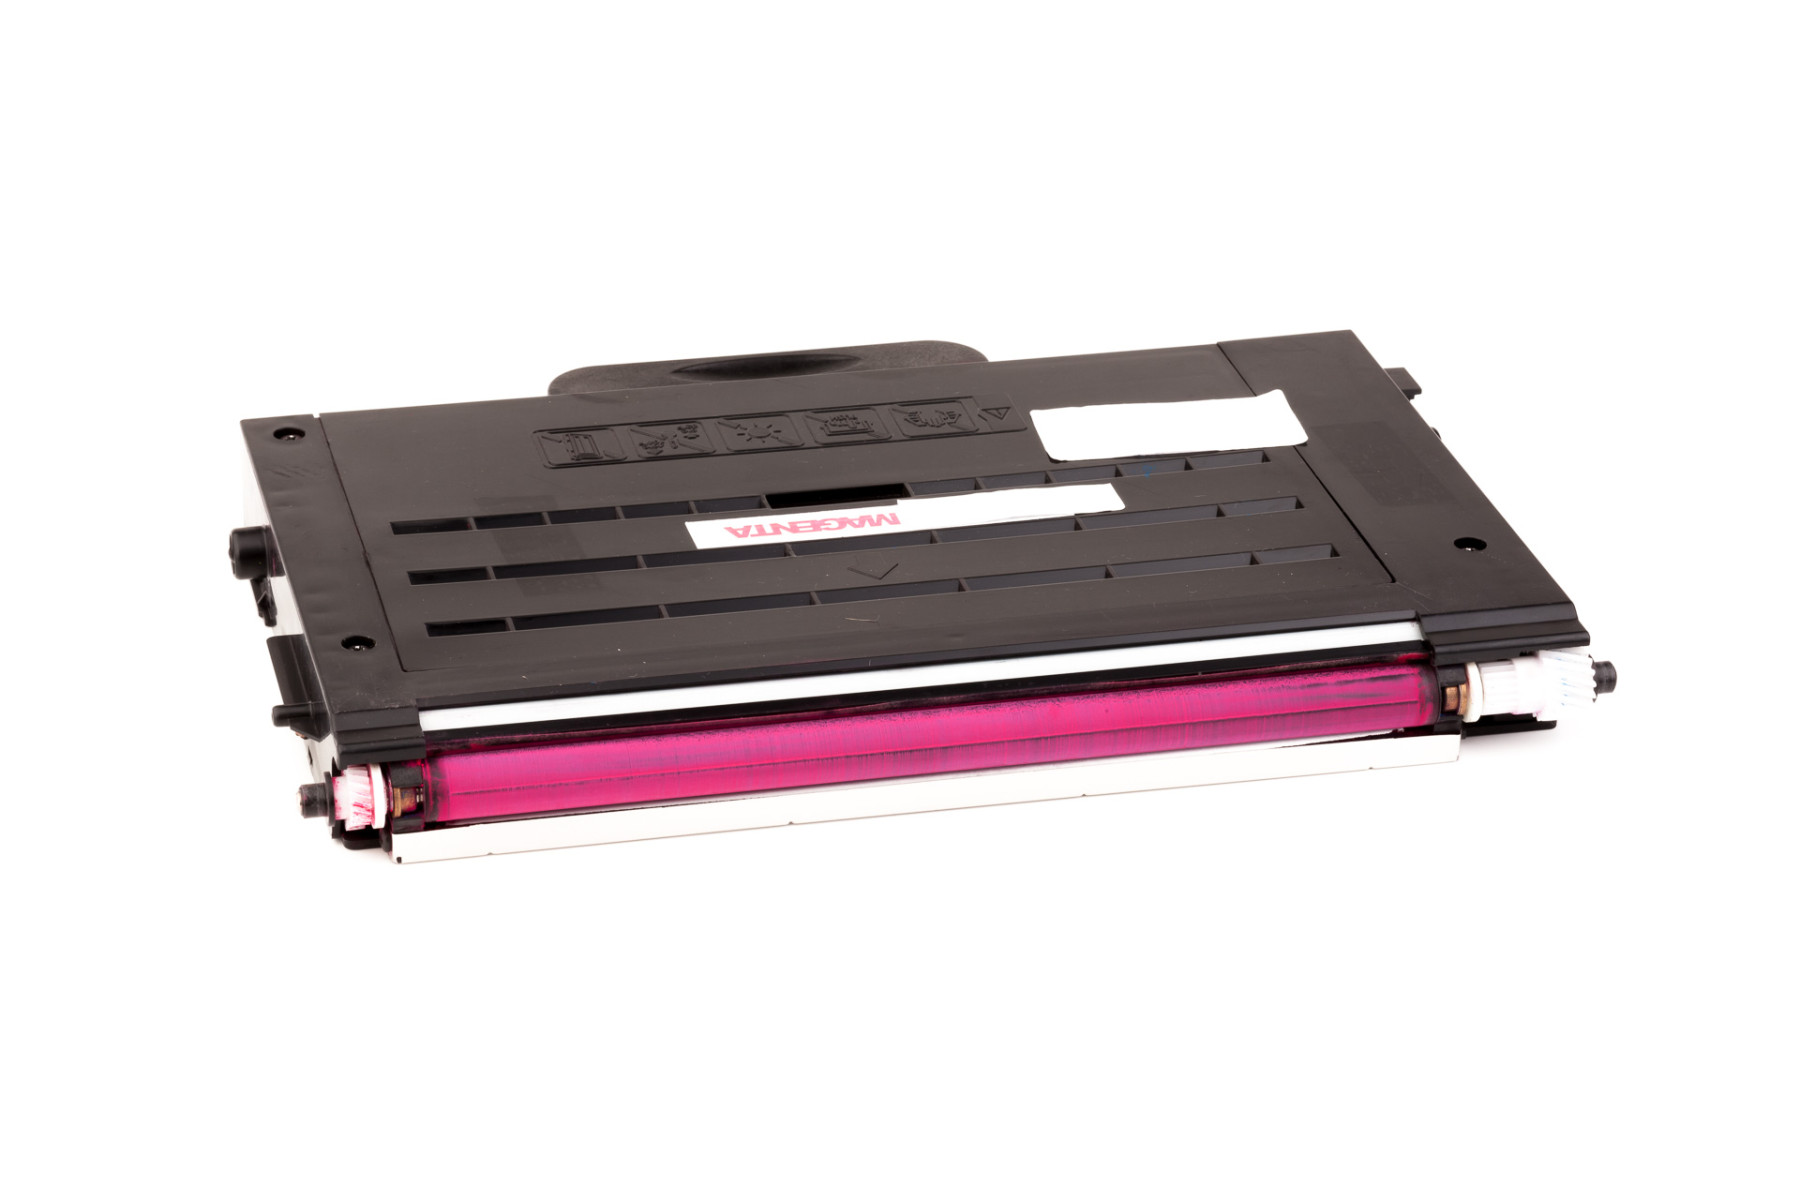 Set consisting of Toner cartridge (alternative) compatible with Xerox 106R00684/106 R 00684 - Phaser 6100 black, 106R00680/106 R 00680 - Phaser 6100 cyan, 106R00681/106 R 00681 - Phaser 6100 magenta, 106R00682/106 R 00682 - Phaser 6100 yellow - Save 6%